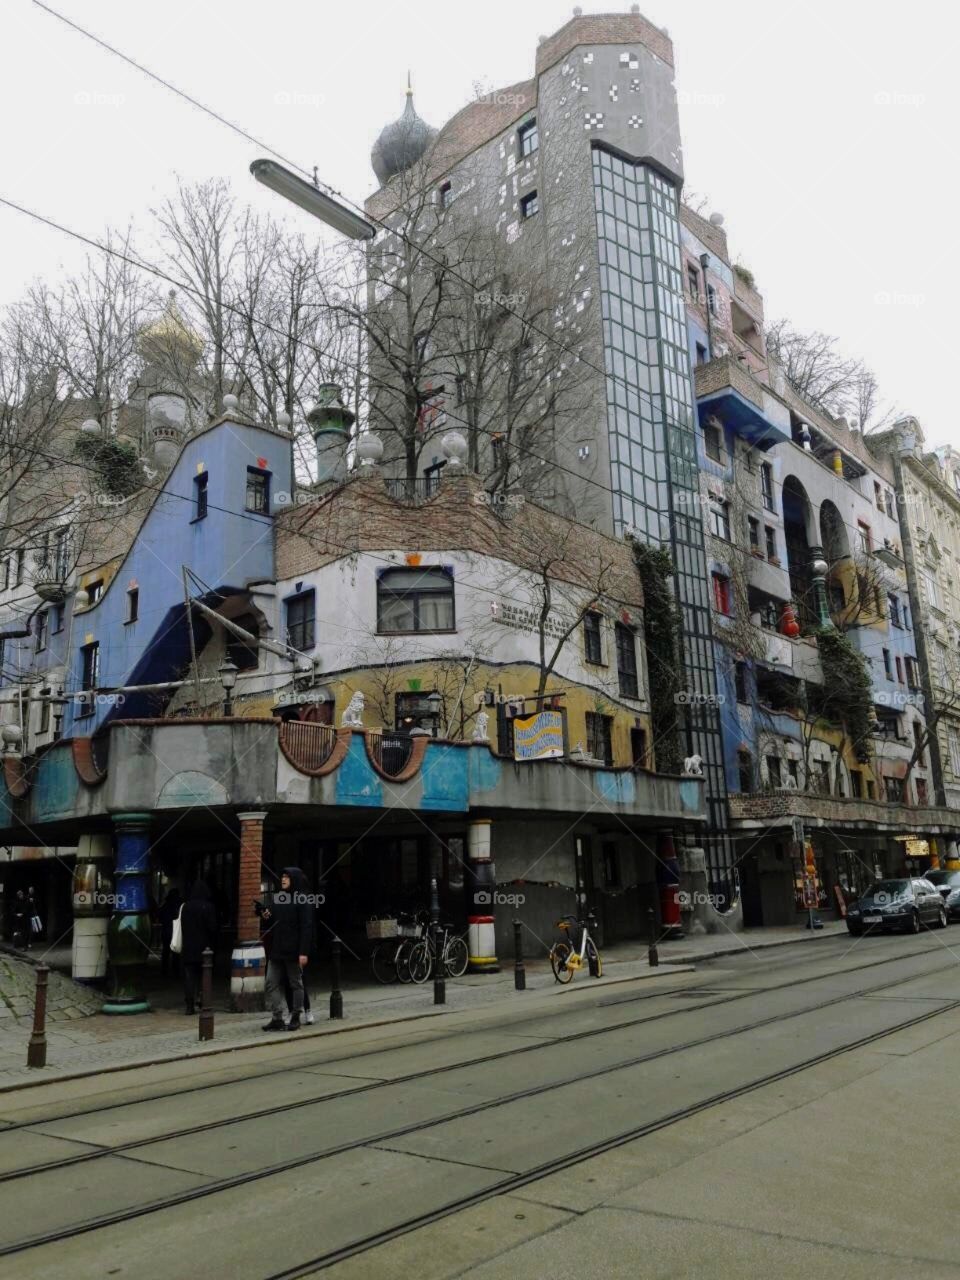 One the most unusual buildings in the world-Hundertwasser House in Vienna, Austria